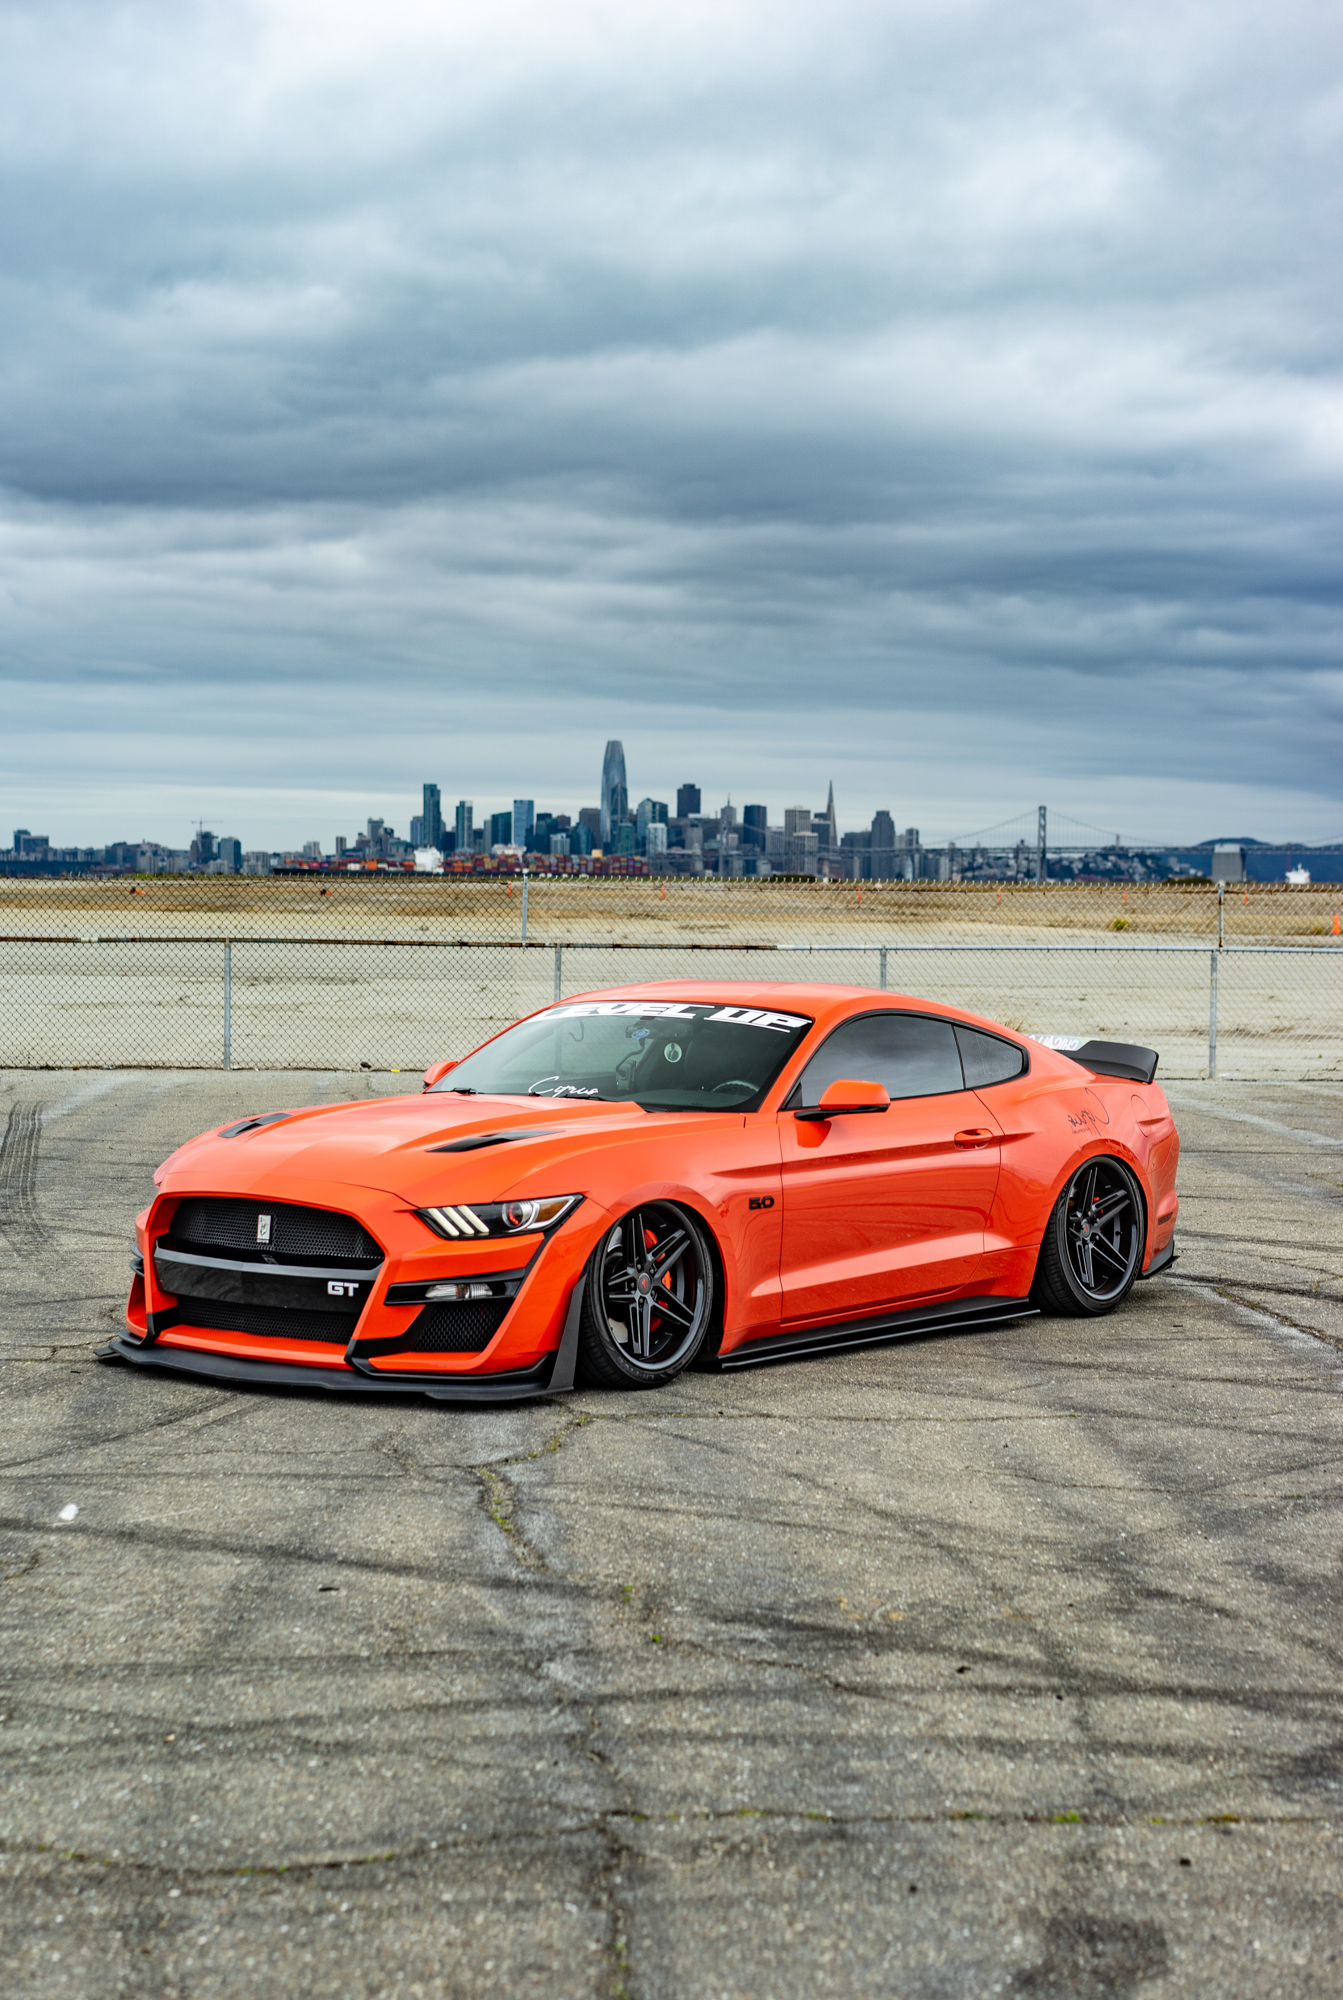 2016 Ford Mustang (Bagged) - CM1 MB (9 of 24)